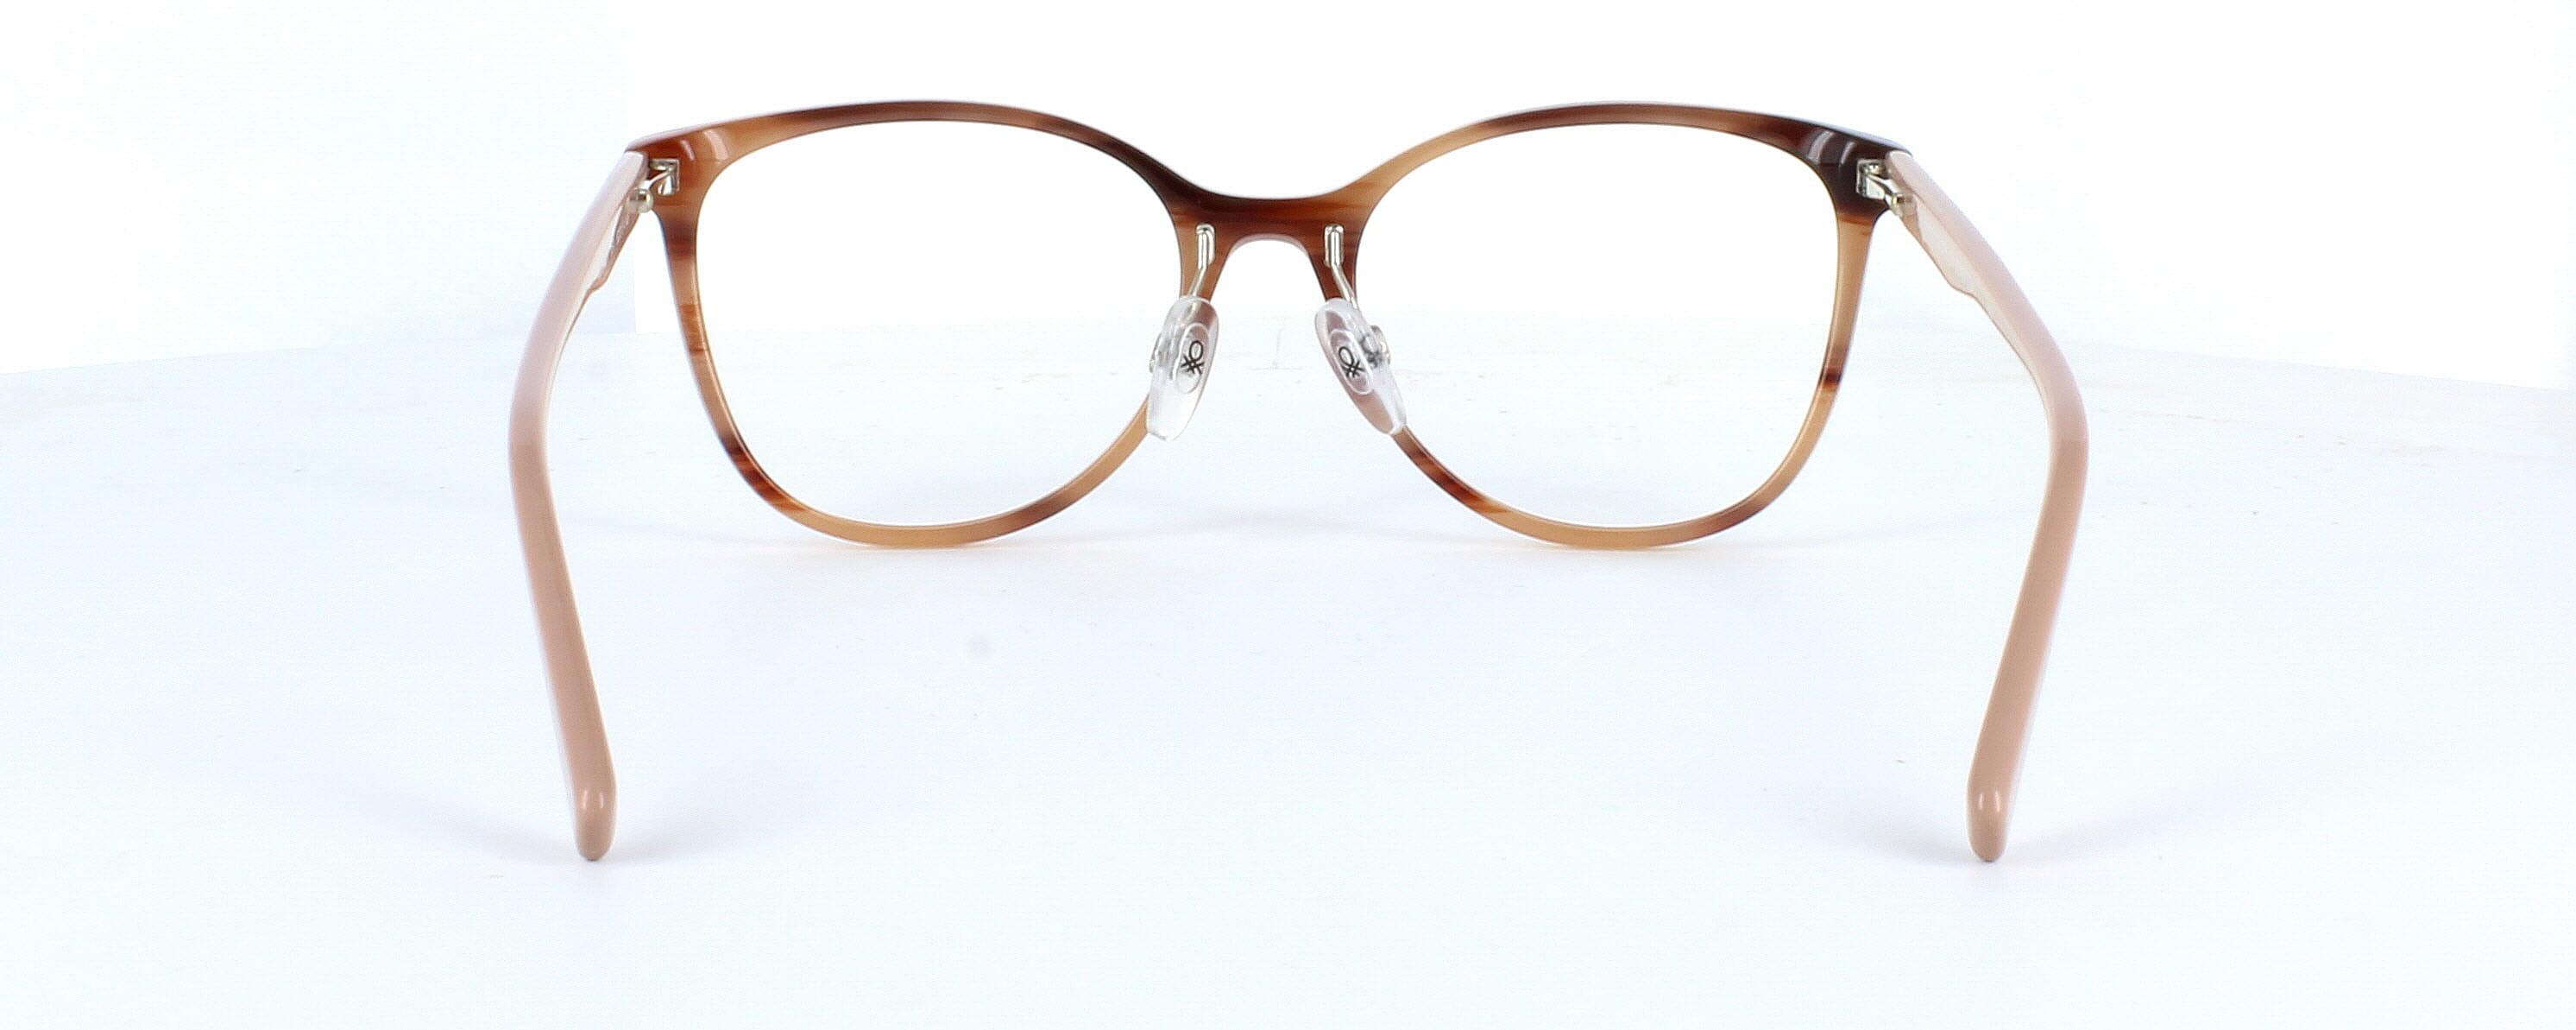 Benetton 1027 151 - Ladies round shaped plastic frame in light tortoise with beige sprung hinged arms - image view 4